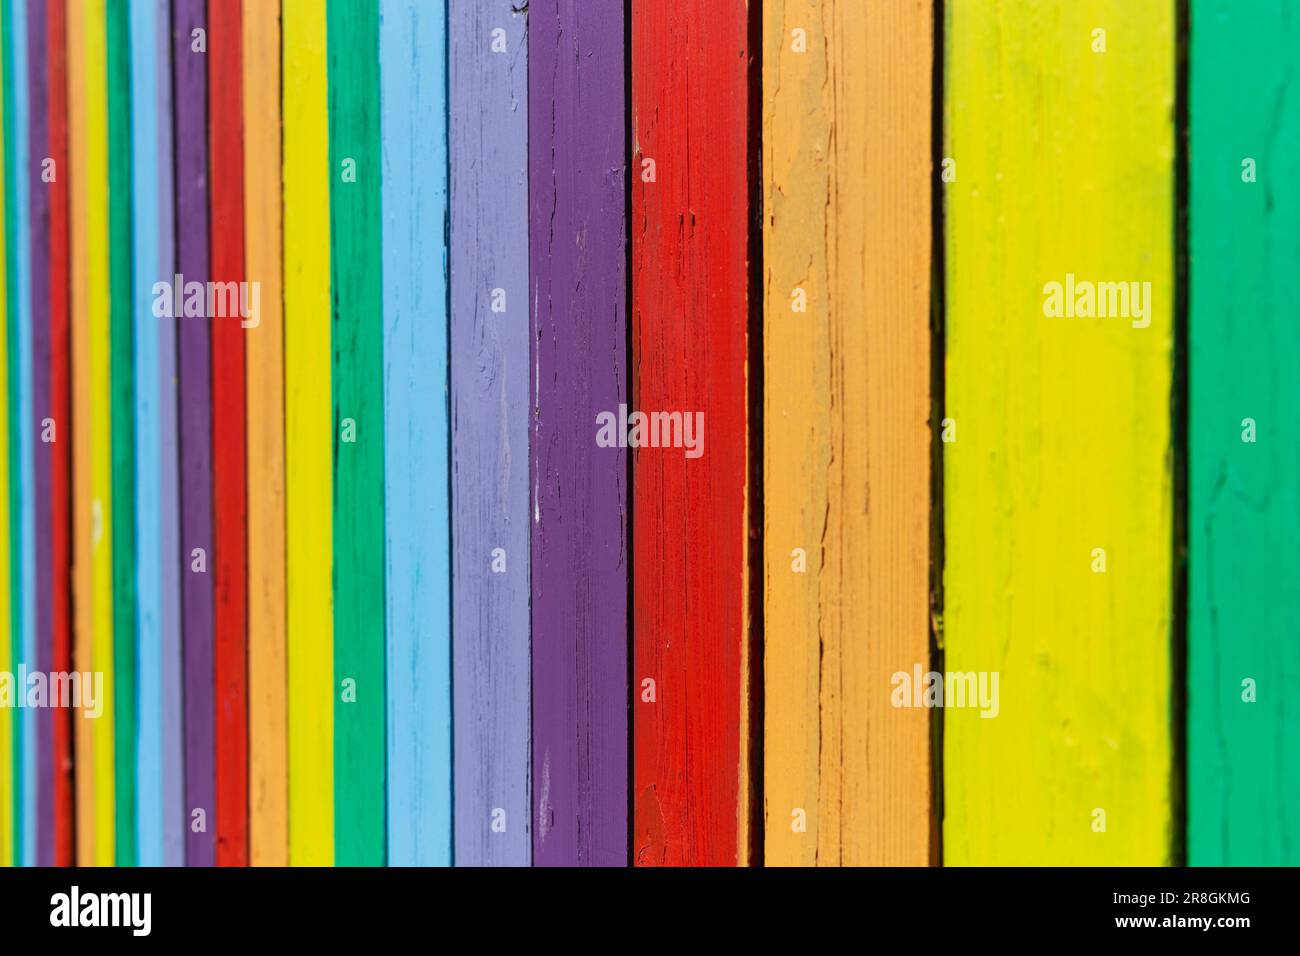 A old fence paint bright colors to make bold pattern. Stock Photo